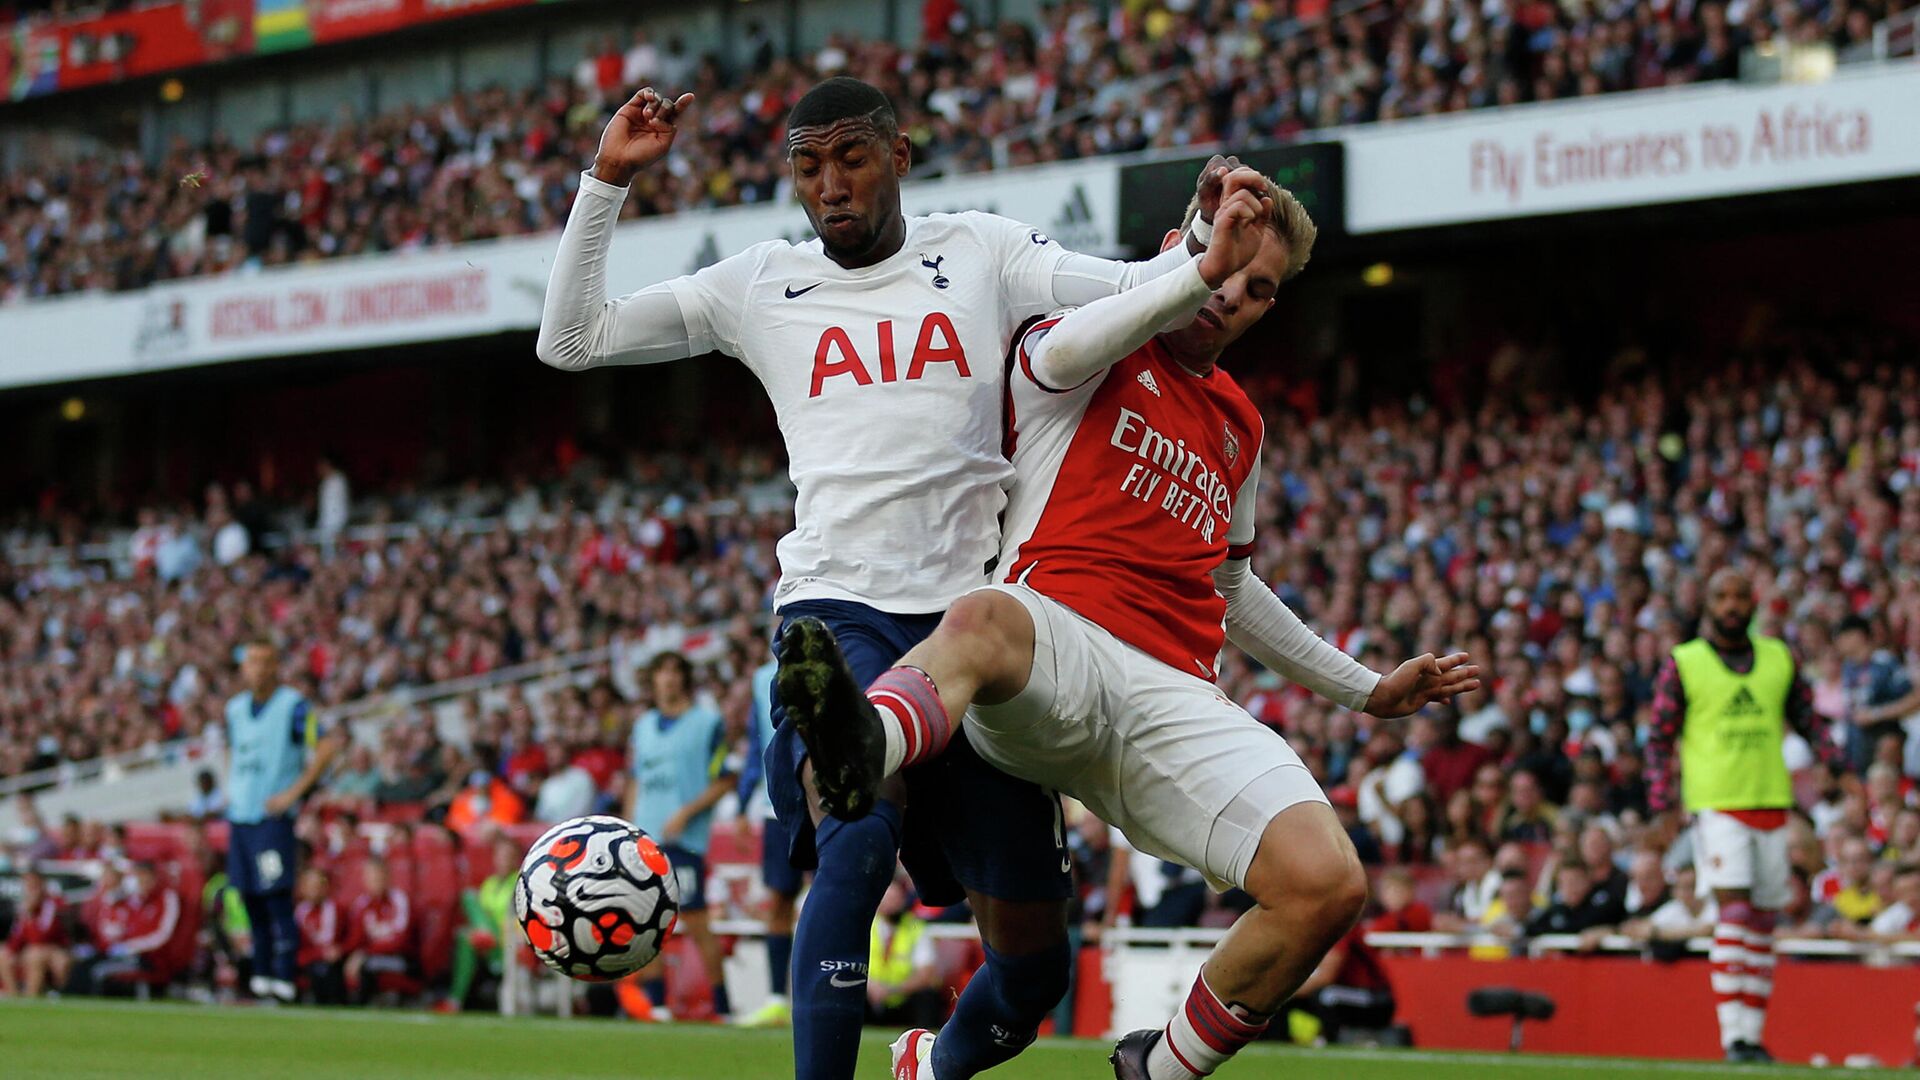 Tottenham Hotspur's Brazilian defender Emerson Royal (L) vies with Arsenal's English midfielder Emile Smith Rowe (R) during the English Premier League football match between Arsenal and Tottenham Hotspur at the Emirates Stadium in London on September 26, 2021. (Photo by Ian KINGTON / IKIMAGES / AFP) / RESTRICTED TO EDITORIAL USE. No use with unauthorized audio, video, data, fixture lists, club/league logos or 'live' services. Online in-match use limited to 45 images, no video emulation. No use in betting, games or single club/league/player publications. - РИА Новости, 1920, 15.01.2022